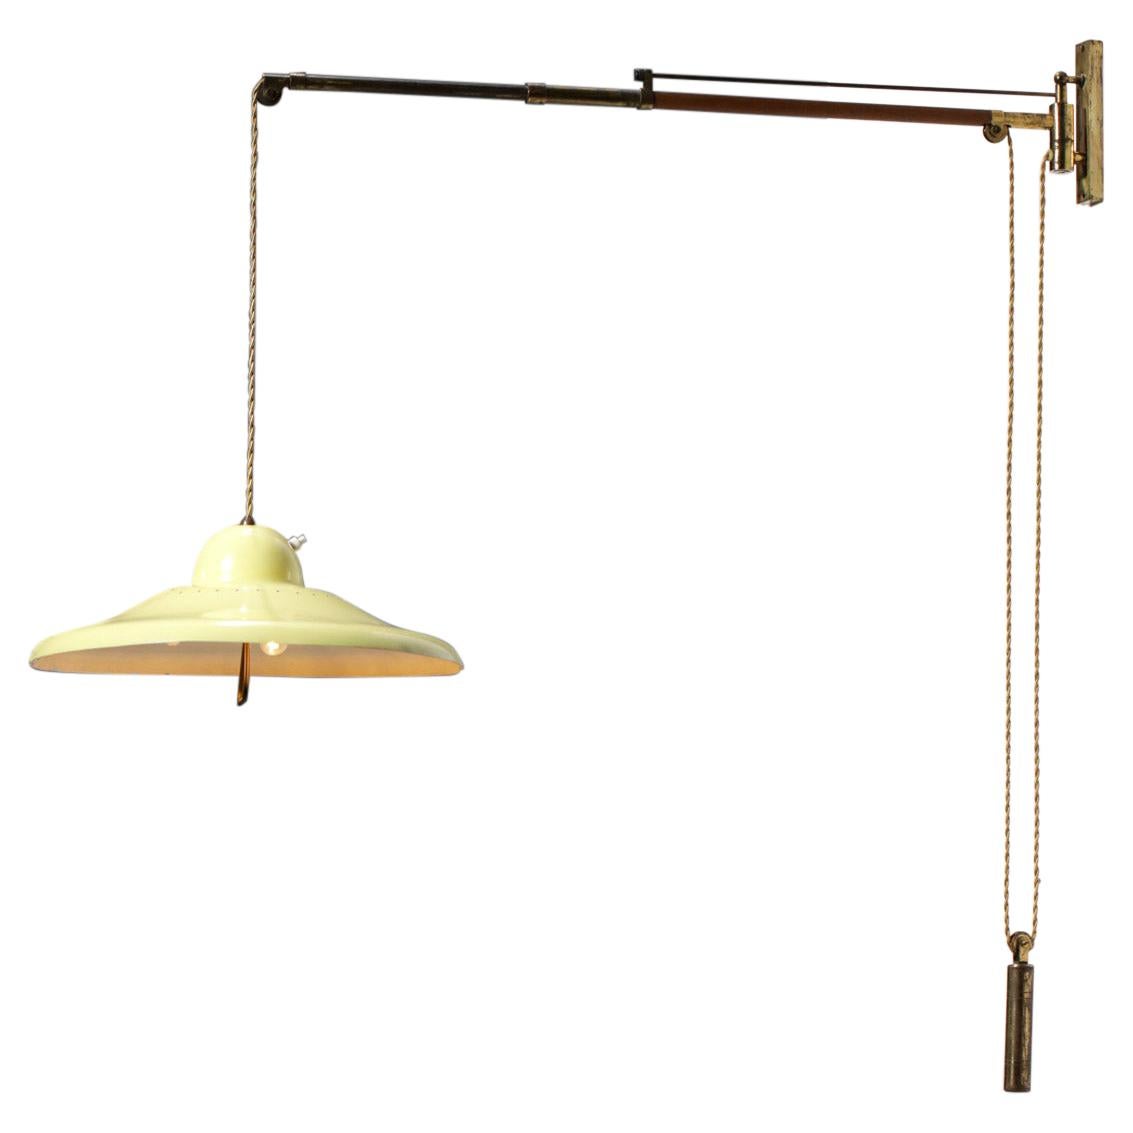 Italian Period Lamp Arredoluce Style Yellow Pulley - F078 For Sale